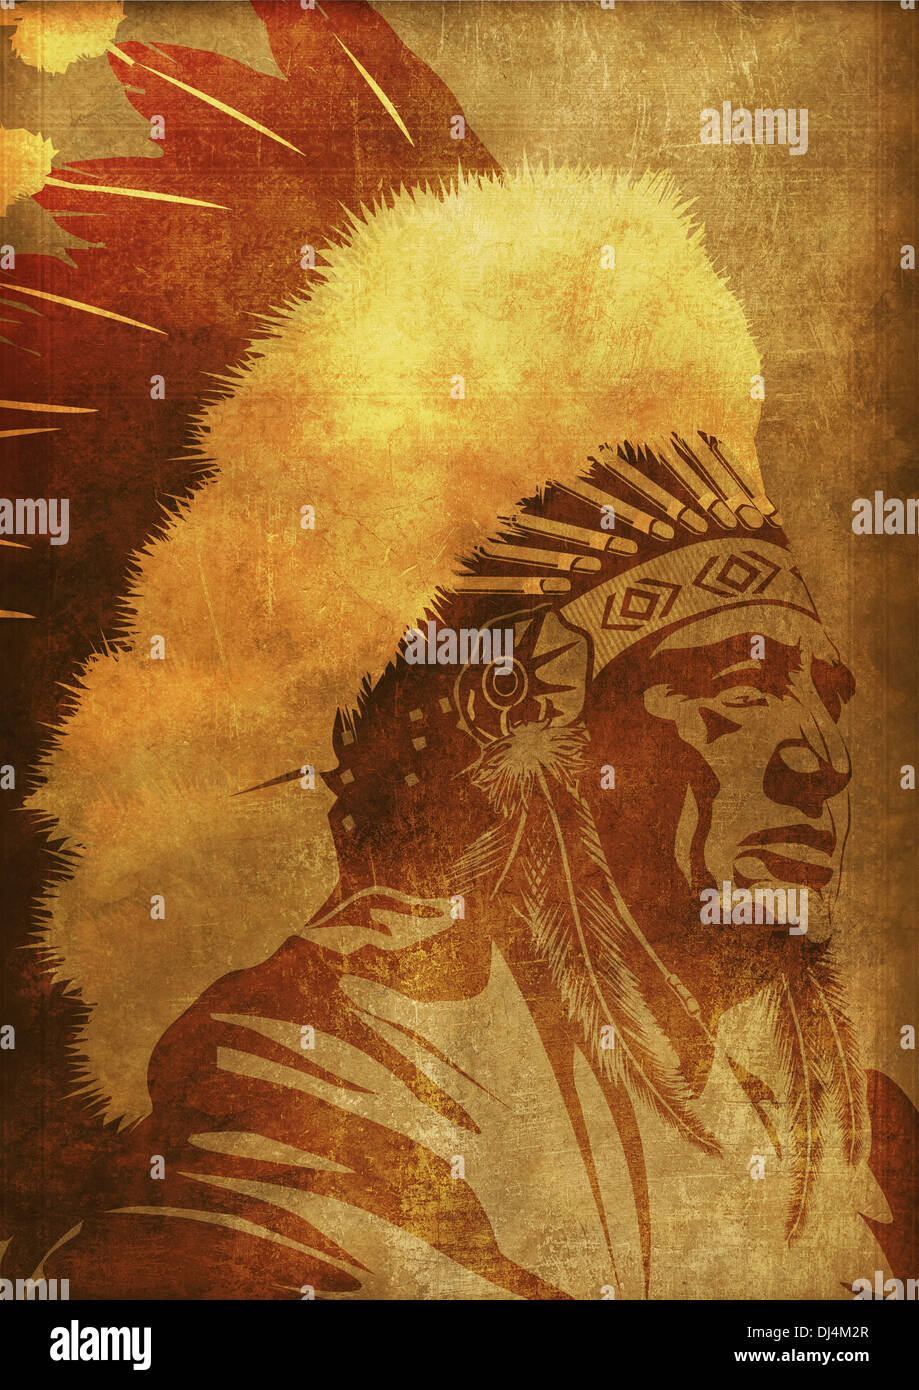 Native American Chief Portrait Vintage Grunge Background. Native American Collection. Stock Photo